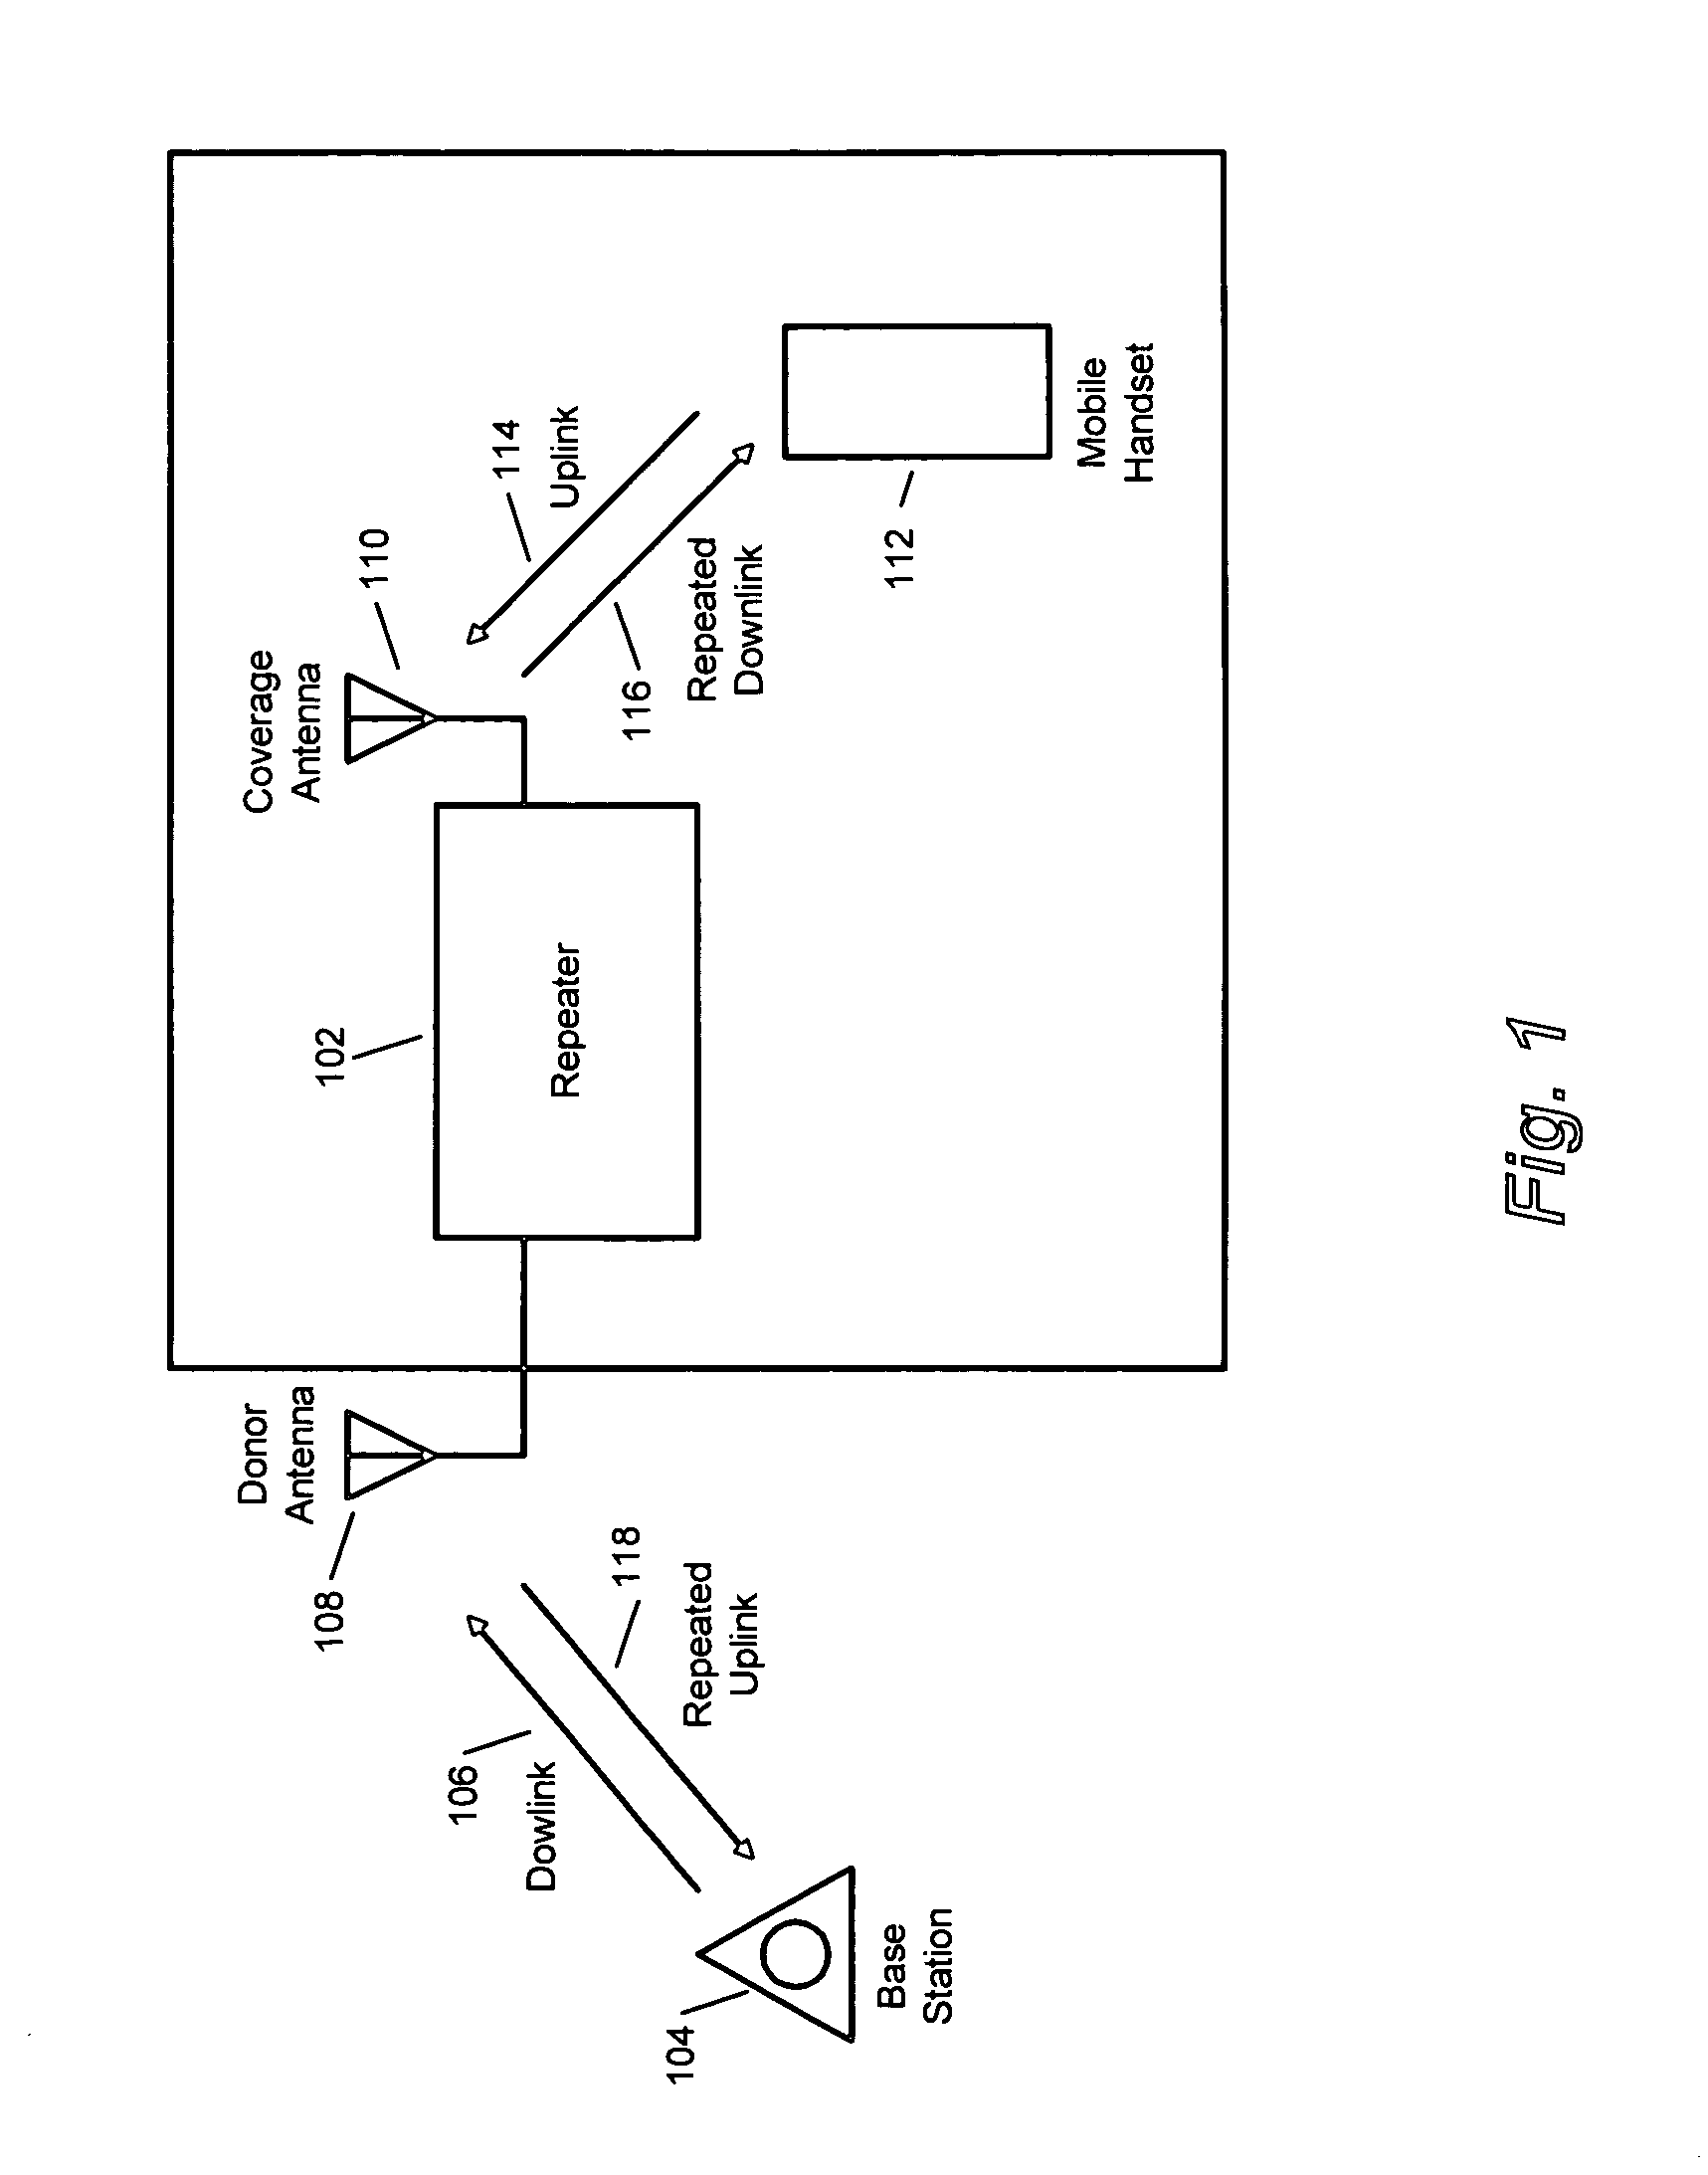 Wireless repeater with arbitrary programmable selectivity